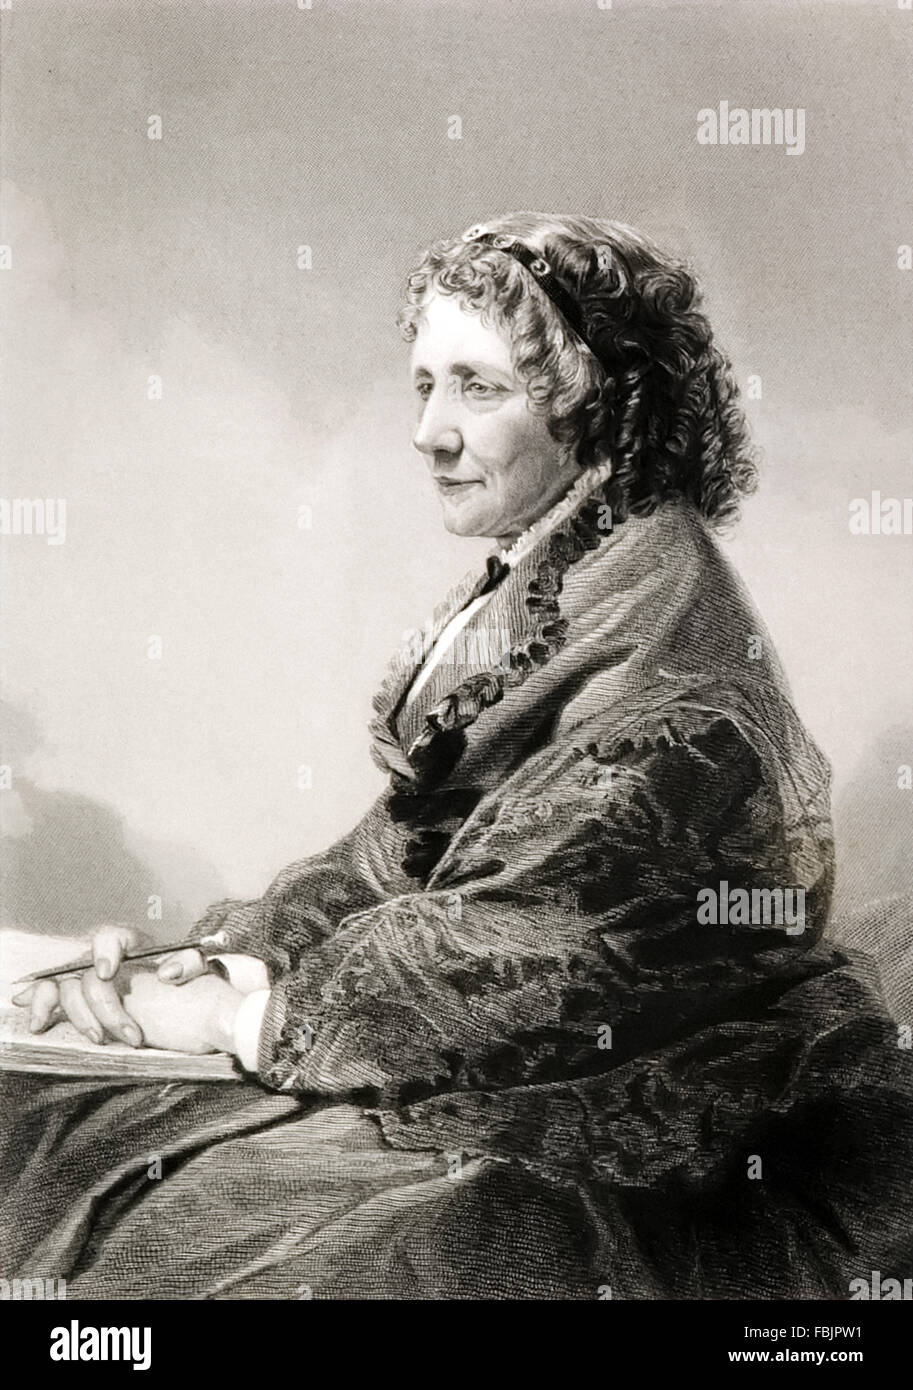 Harriet Beecher Stowe (1811-1896) author of 'Uncle Tom's Cabin; or, Life Among the Lowly' published in 1852. This seminal anti-slavery novel that did much to progress the abolitionist cause in the 1850s. Harriet Beecher Stowe (1811-1896) author of 'Uncle Tom's Cabin; or, Life Among the Lowly' published in 1852. This seminal anti-slavery novel that did much to progress the abolitionist cause in the 1850s. Photograph of an engraving published in 1872 based on an original studio portrait taken circa 1860. Credit: Private Collection / AF Fotografie Stock Photo